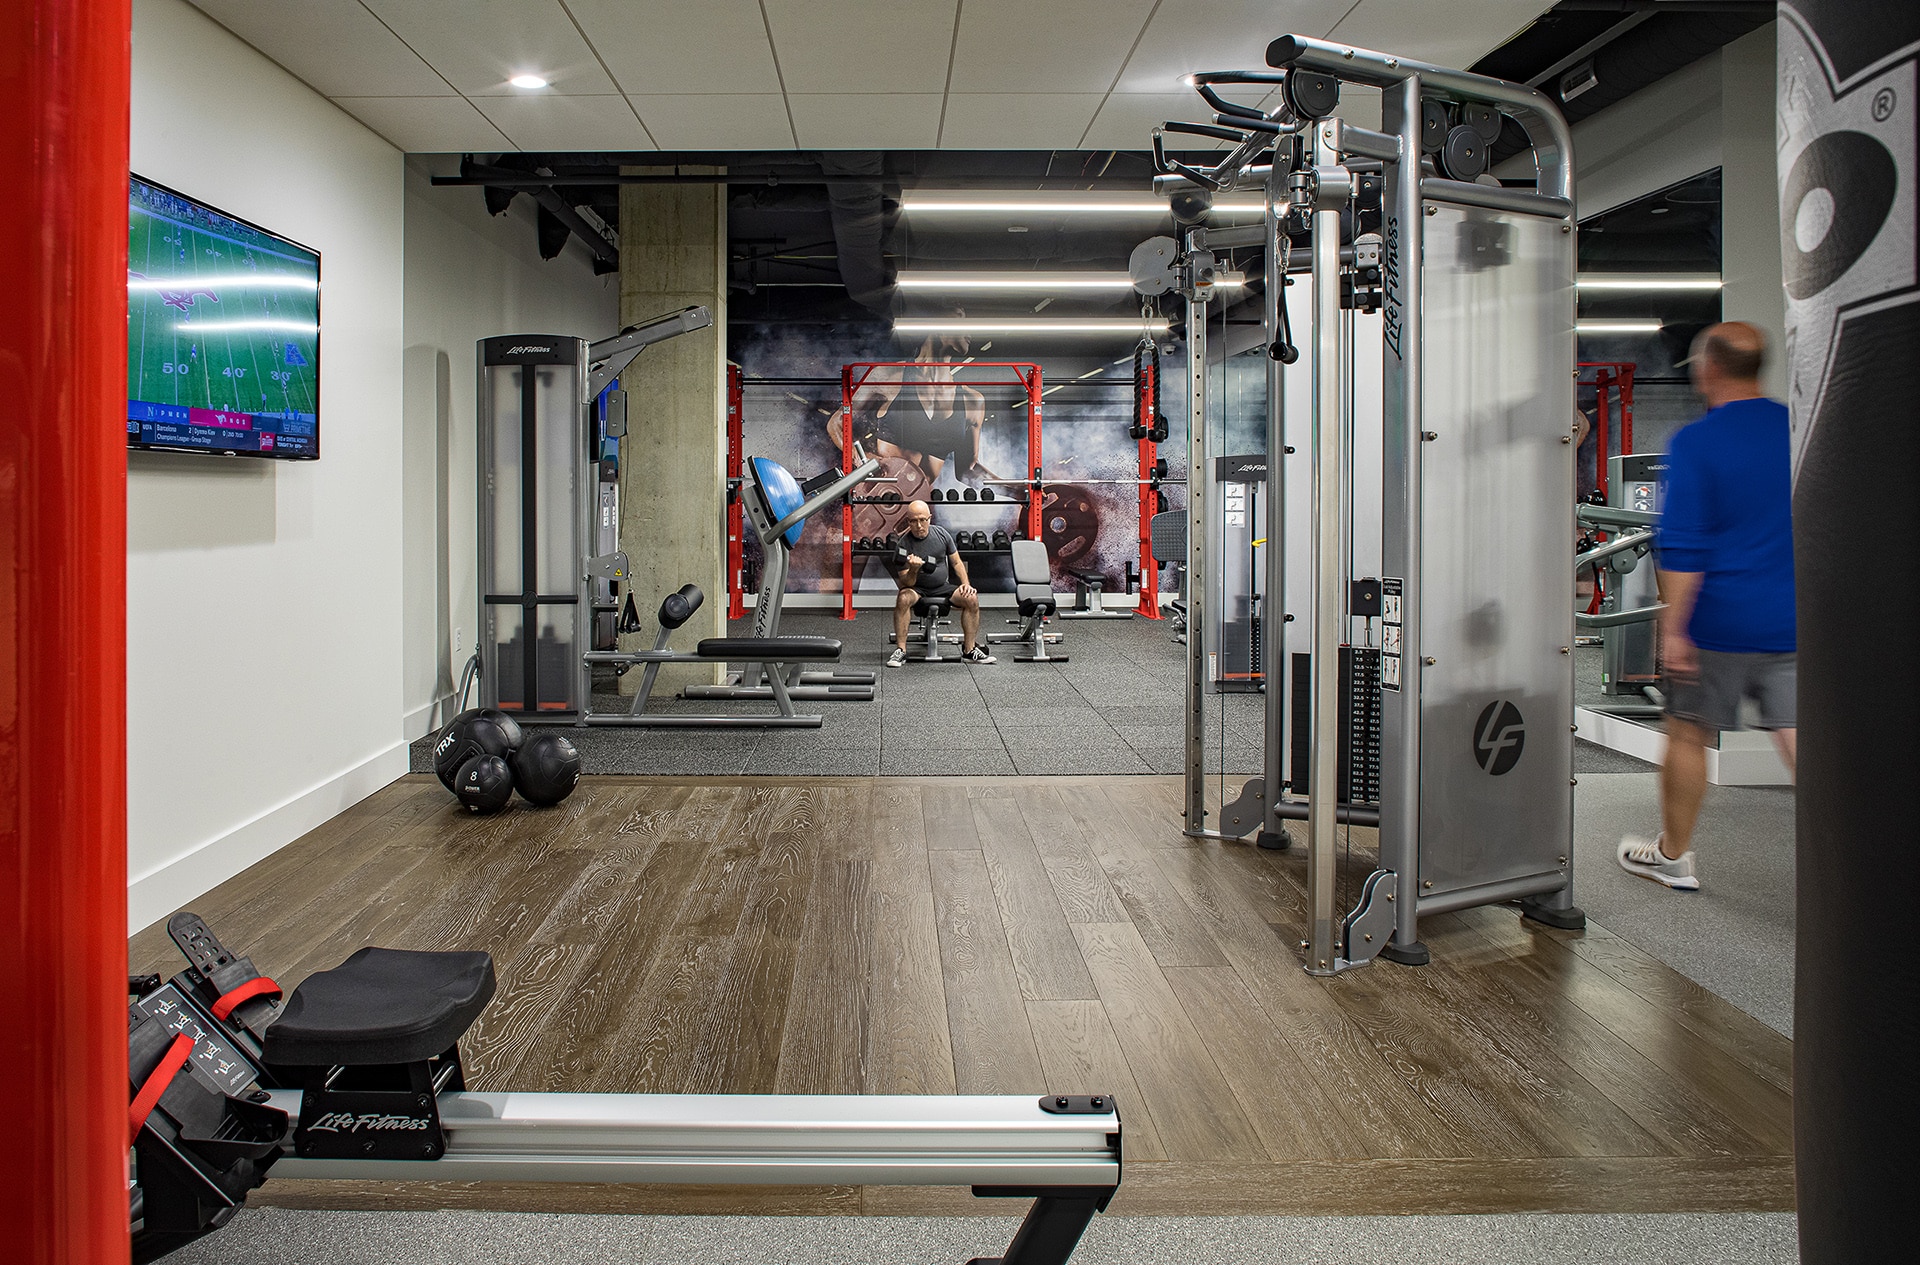 The Euclid Apartments Interior Gym Designed by Trivers Architectural Firm